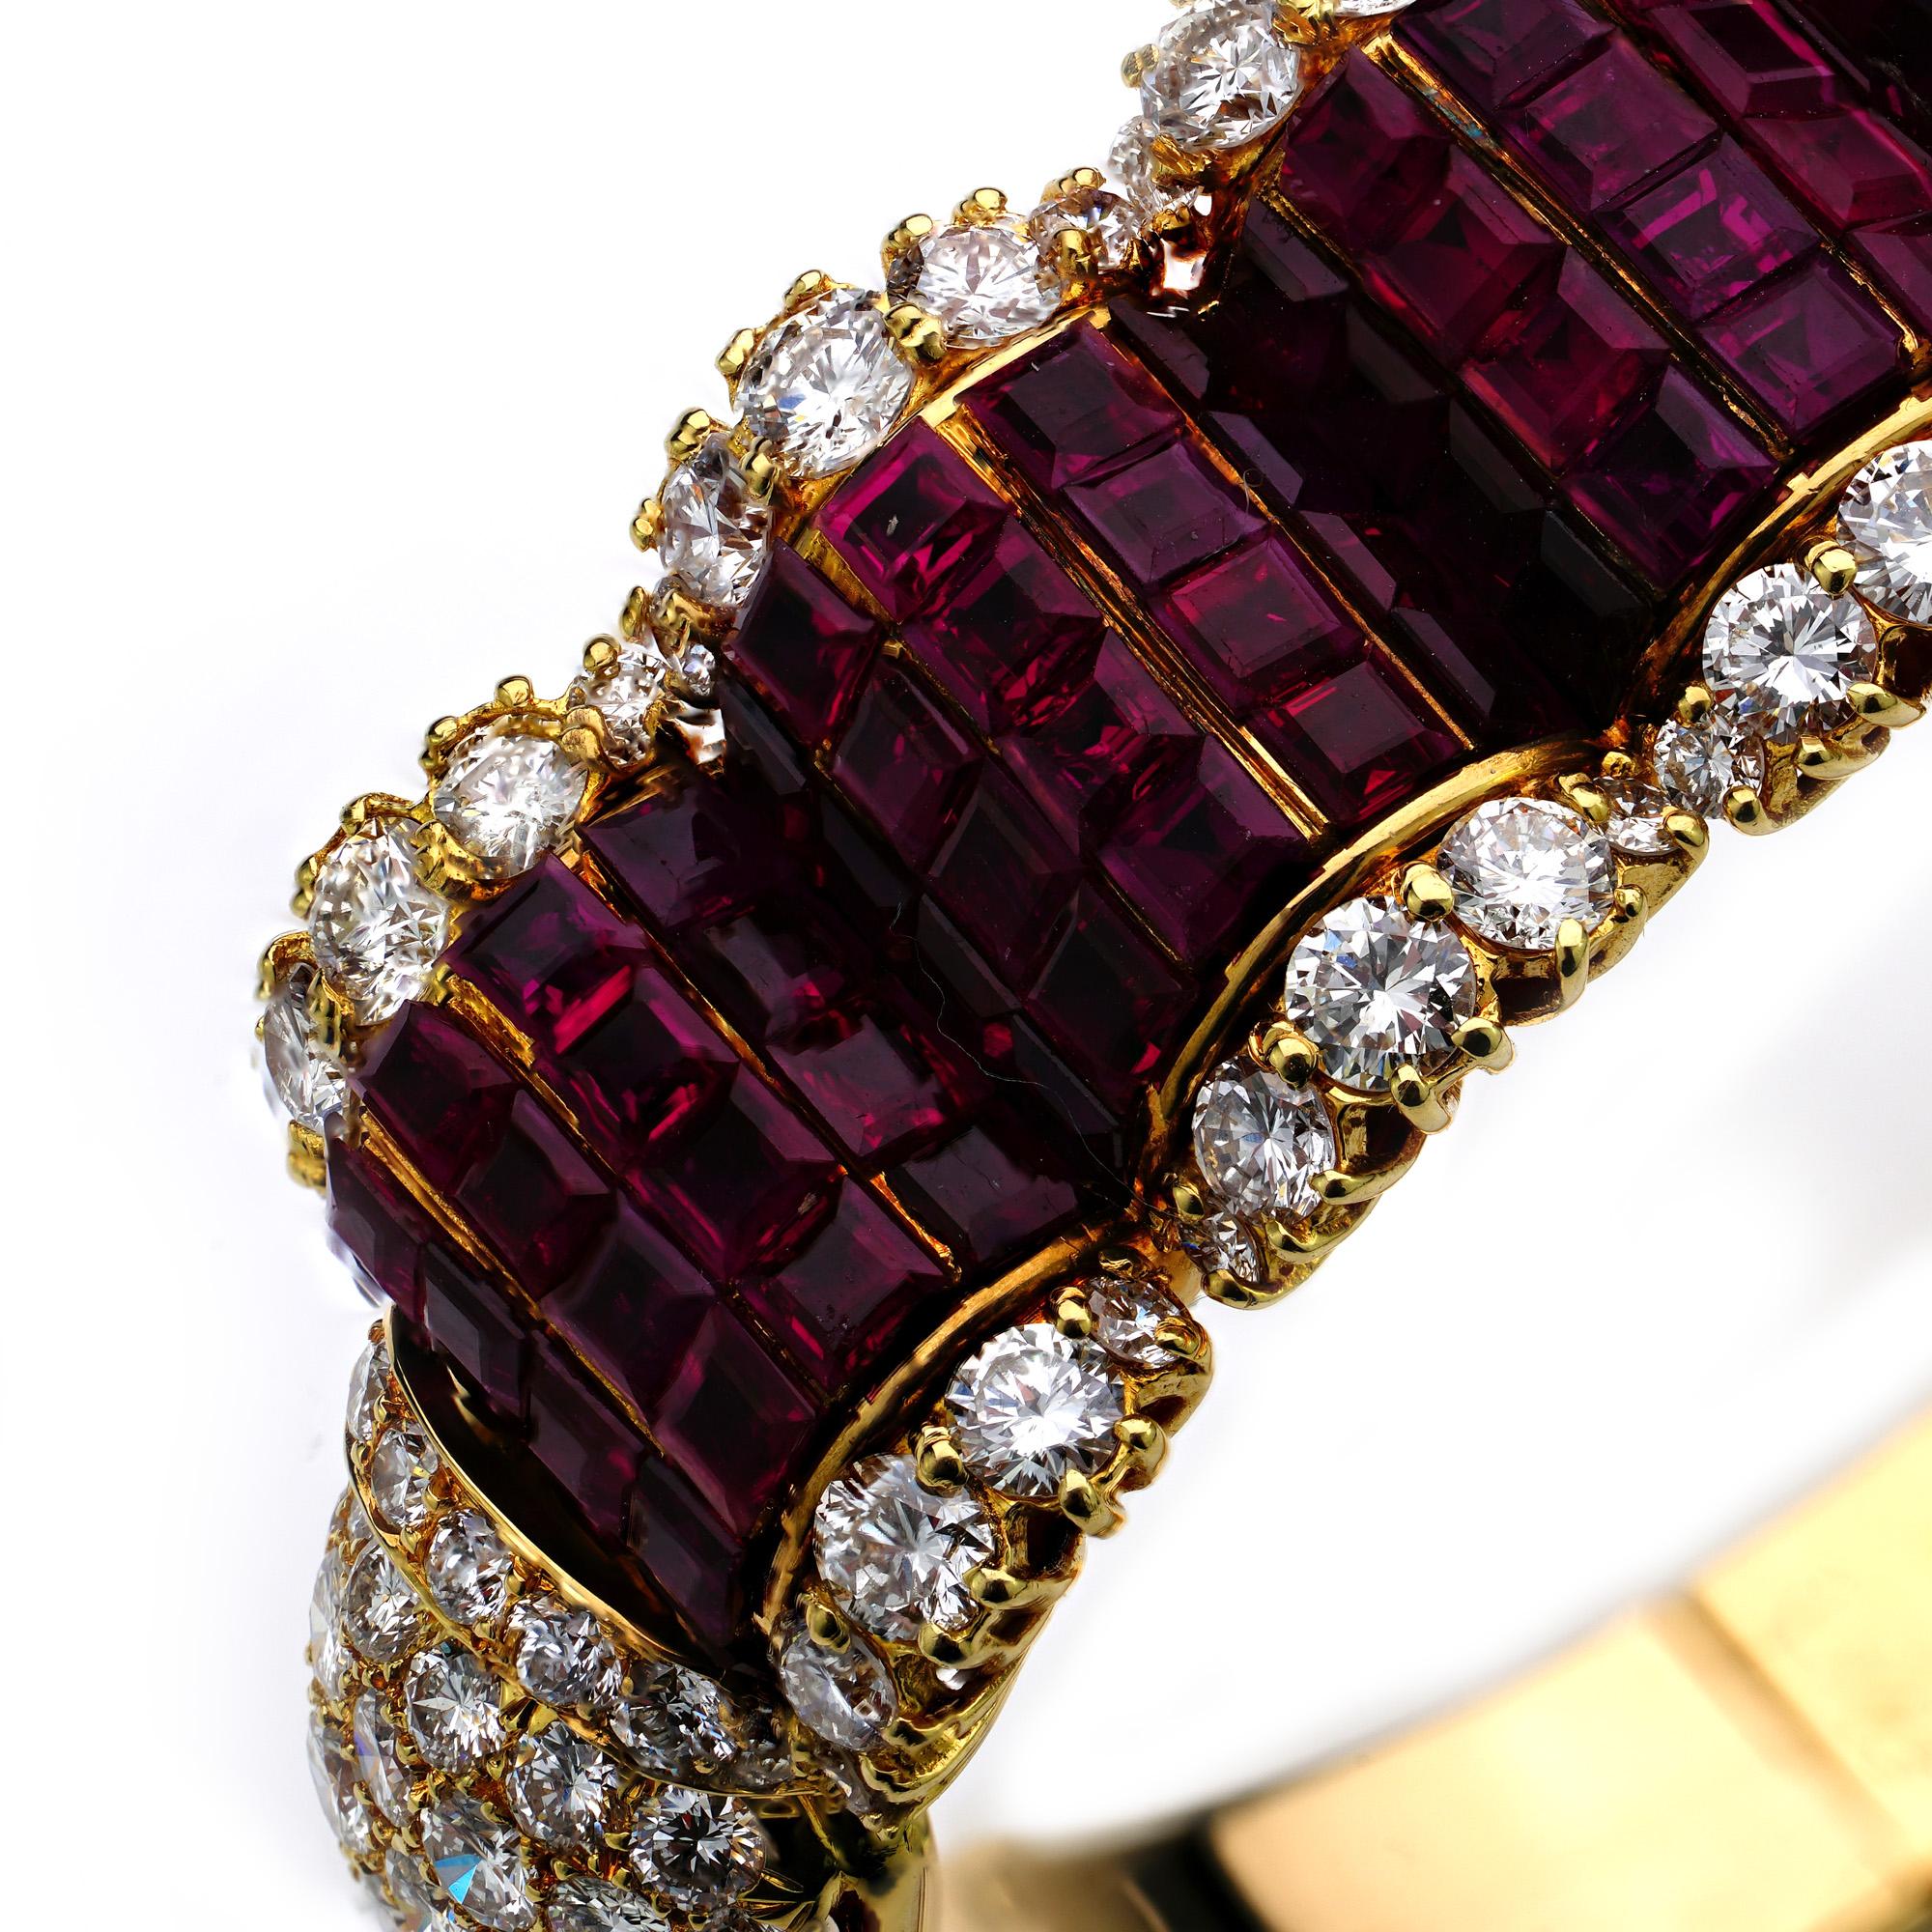 Women's or Men's 14kt. Yellow Gold Bangle Set with 18 Ct. Rubies and 12.84 Ct. Diamonds For Sale